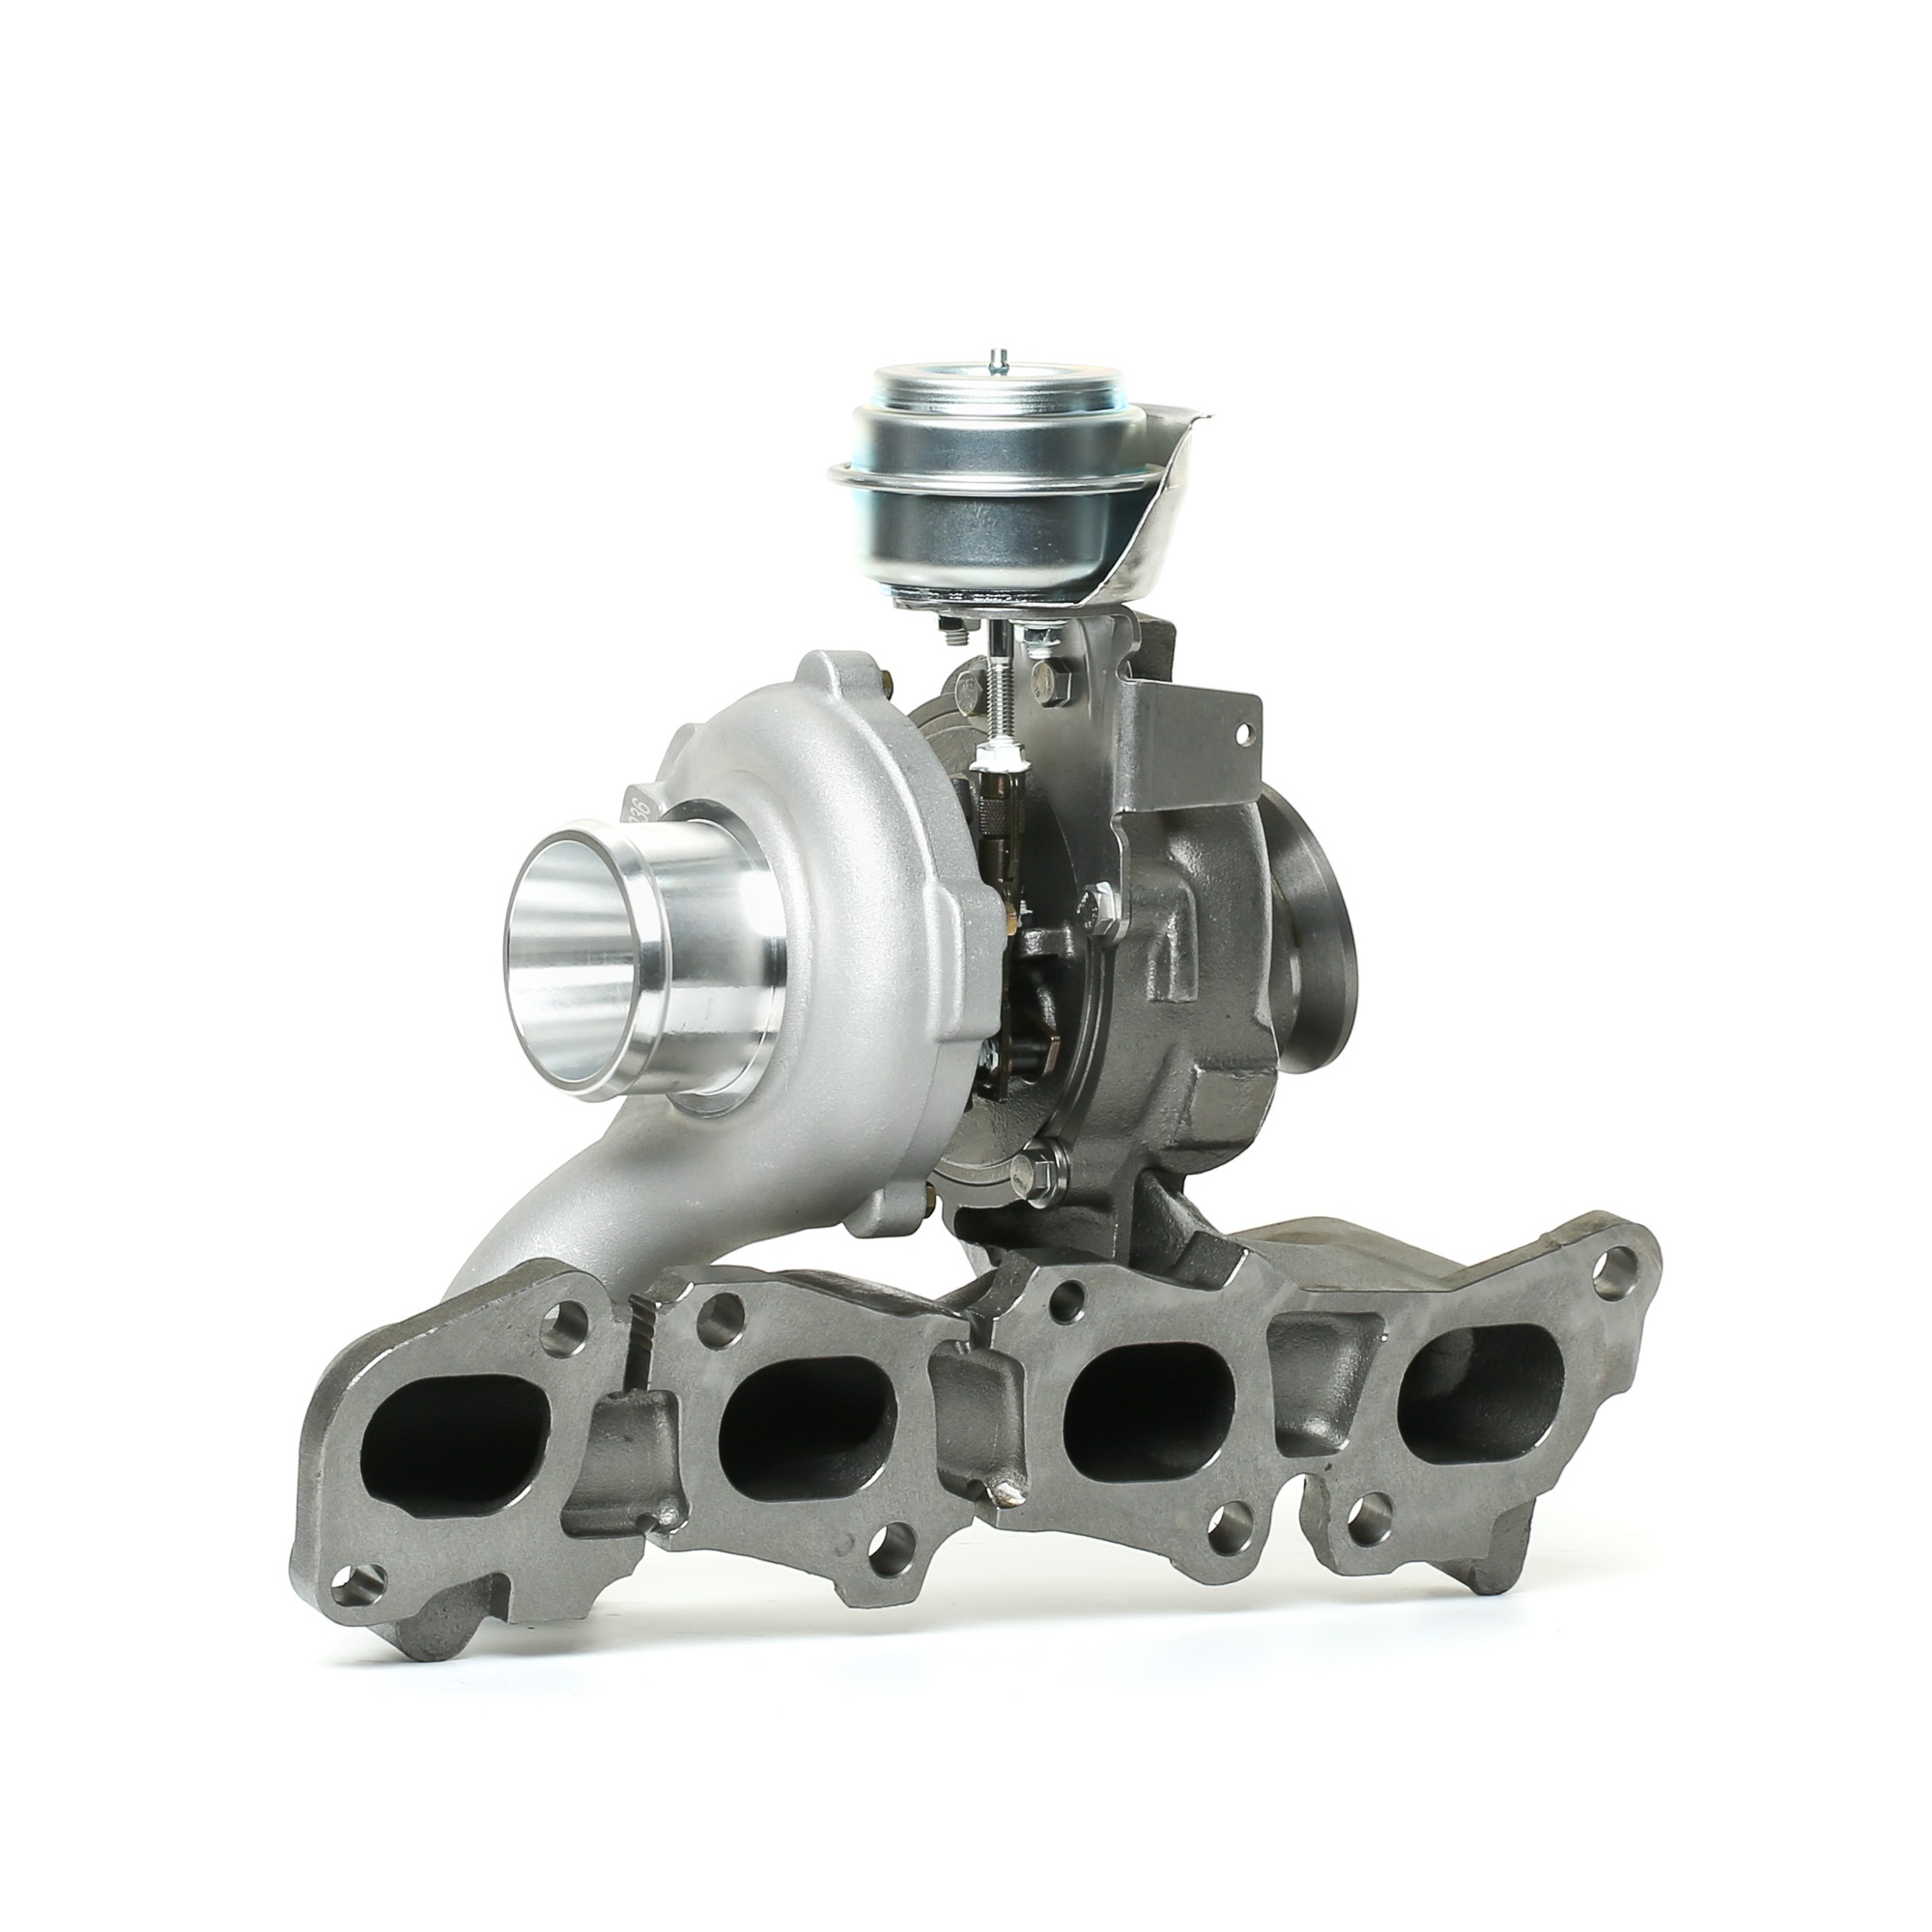 STARK SKCT-1190029 Turbocharger Exhaust Turbocharger, VTG turbocharger, Euro 4, Vacuum-controlled, without attachment material, without accessories